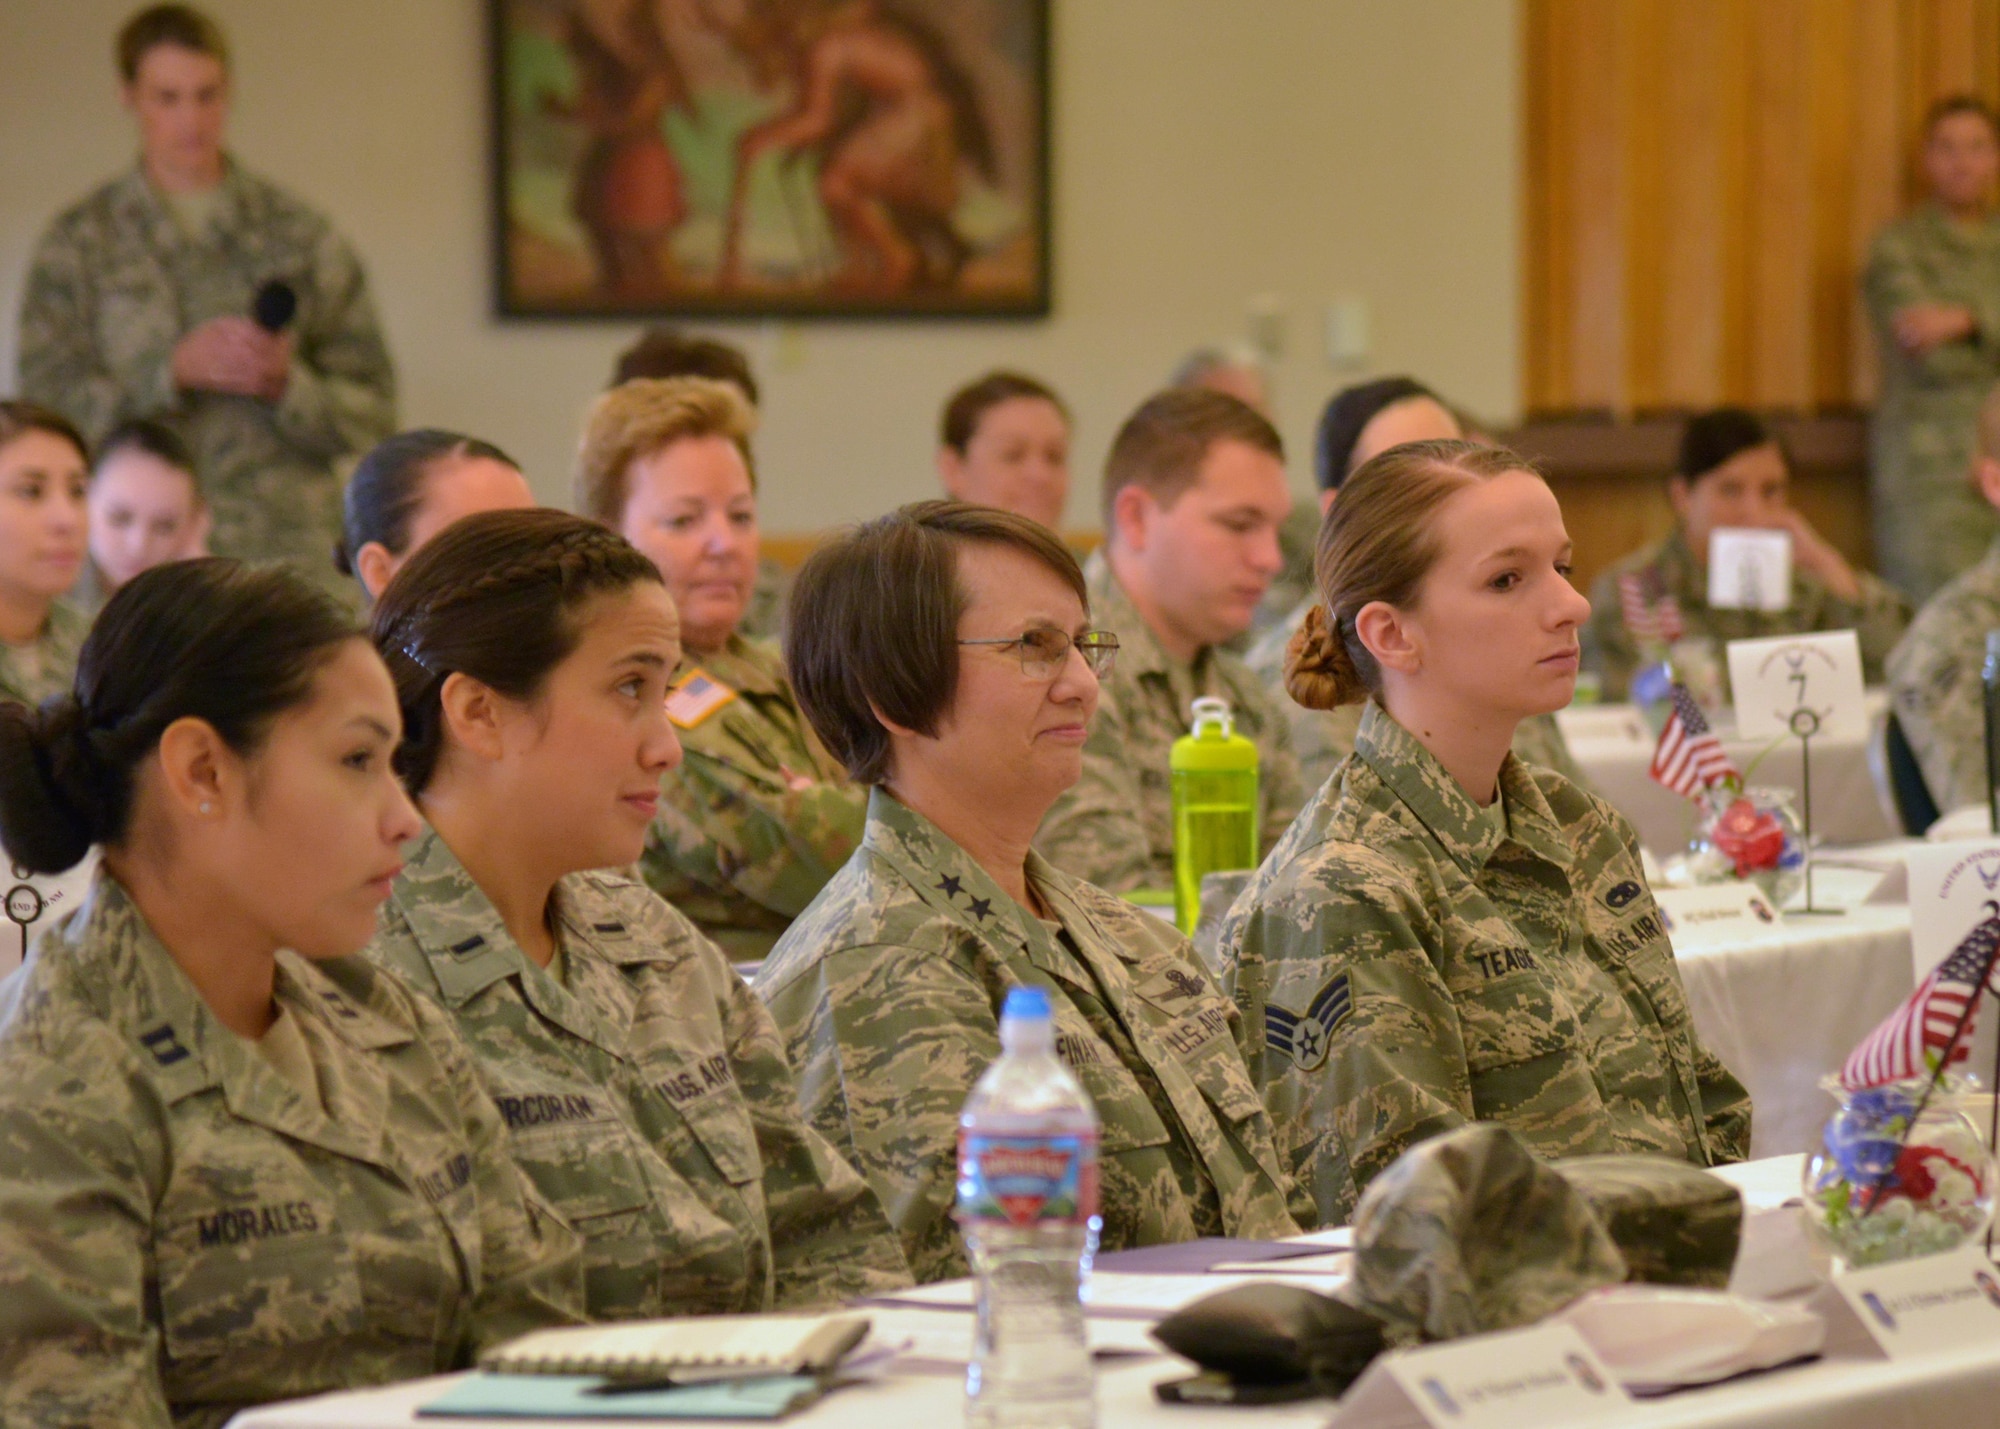 Maj. Gen. Sandra Finan, Deputy Chief Information Officer for Command, Control, Communications and Computers and Information Infrastructure Capabilities, Office of the Secretary of Defense, listens to a brief along with Airmen at the 20th Air Force Women’s Leadership Symposium at Kirtland Air Force Base, N.M., Sept. 27, 2016. During her brief, Finan stressed the importance of Airmen executing the ICBM mission to continue doing so with professionalism, skill, dedication and expertise. The three-day event supports 20th AF’s goal to coach, train and mentor nuclear professionals and leaders, while developing a nuclear command environment that fosters understanding, respect and the support necessary for people to thrive. (U.S. Air Force photo by Jamie Burnett)